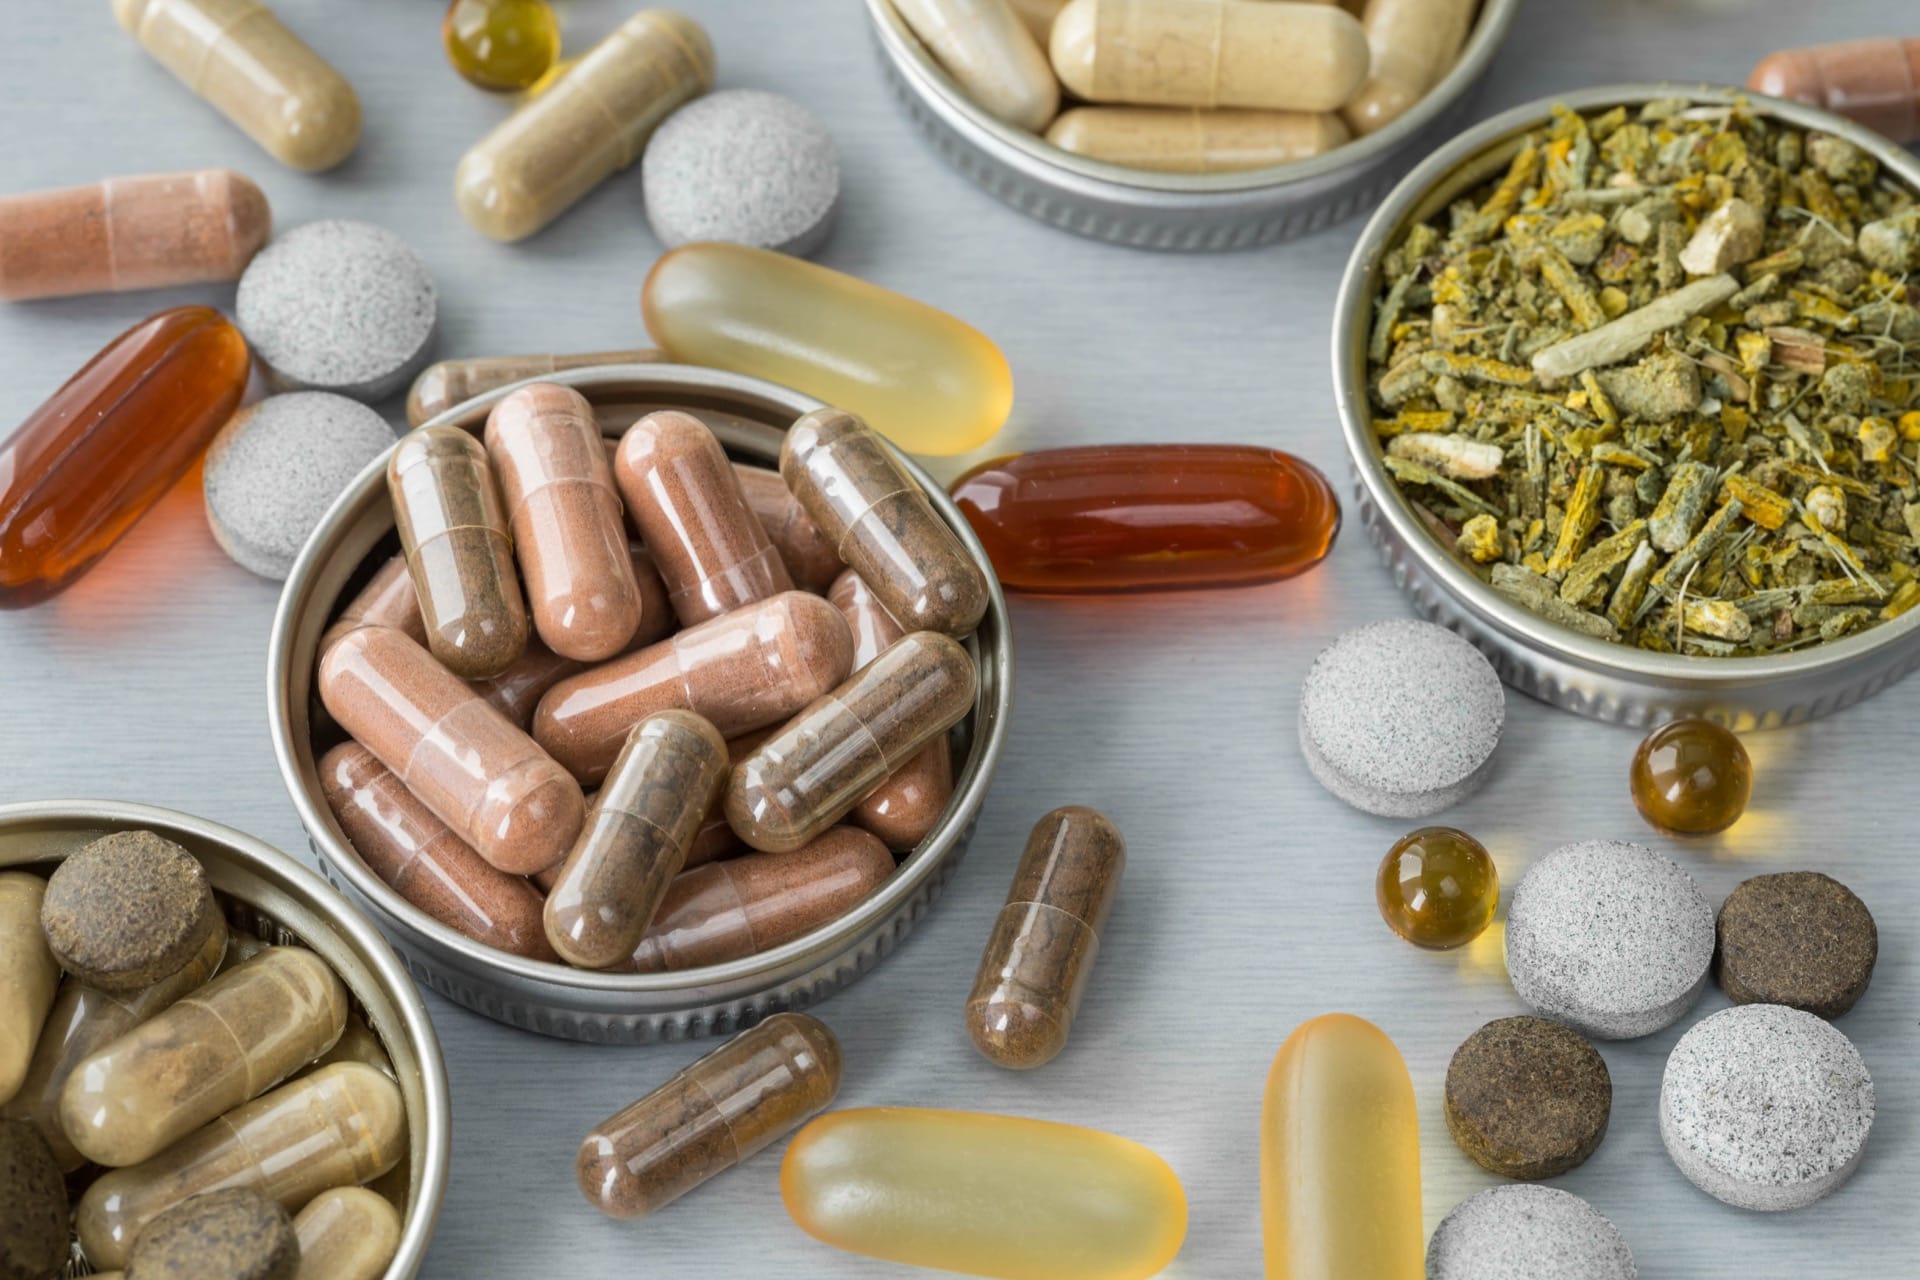 Mythbusting: Everyone needs to take a multivitamin - Your Health